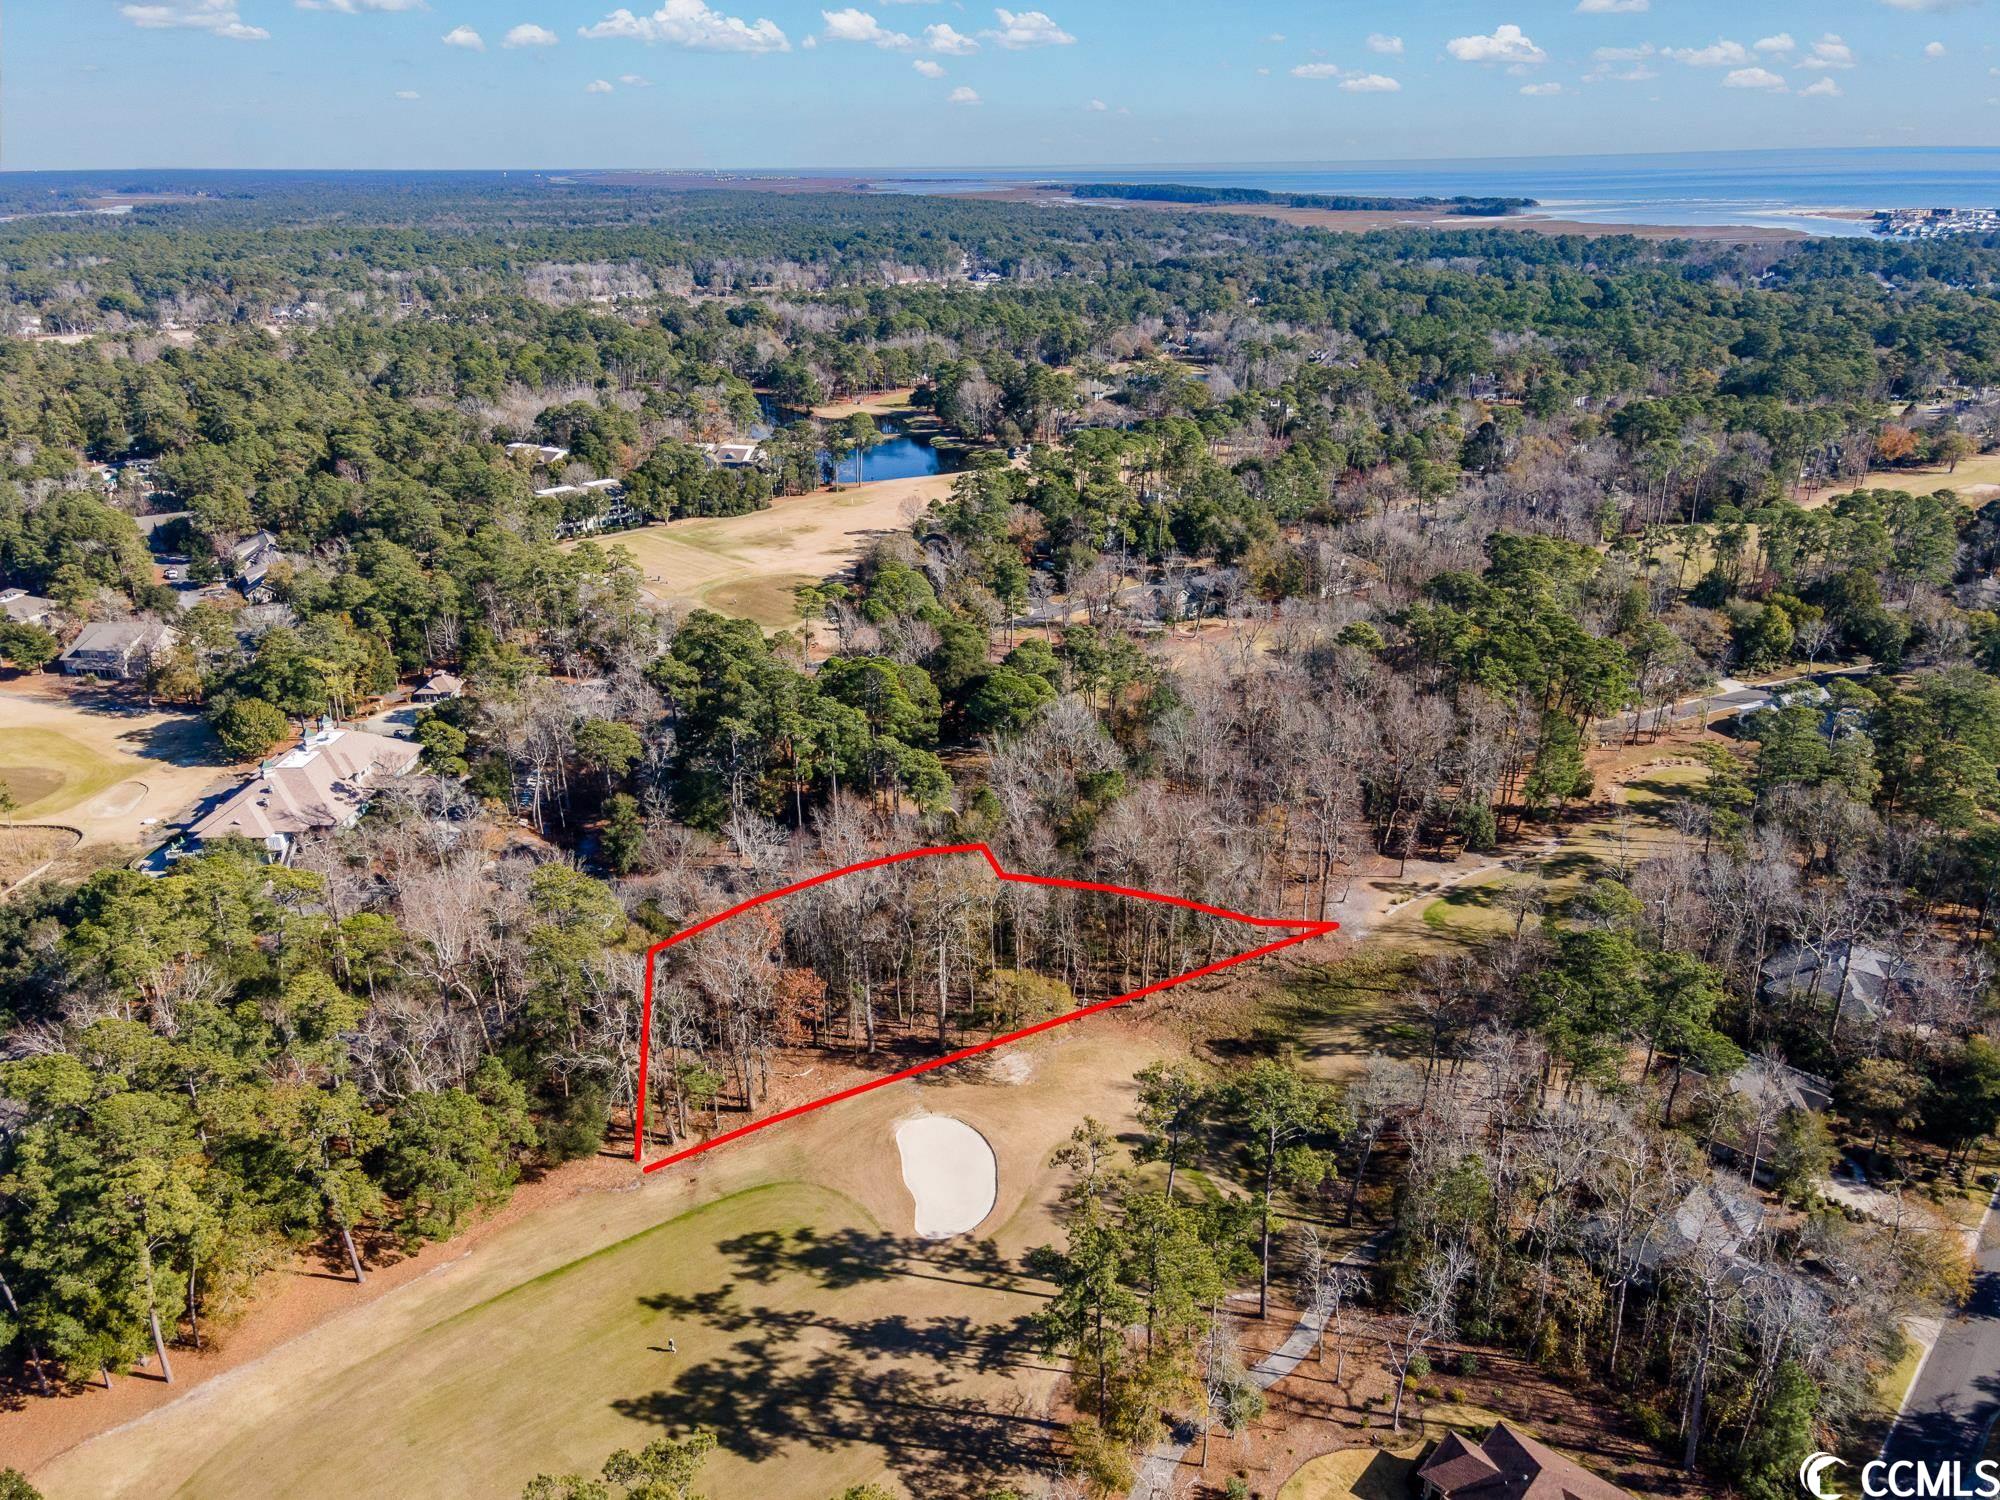 build your dream home in paradise; nestled amidst the lush greenery and serene waterways of tidewater plantation, this ~2/3 (0.65) of an acre residential lot presents the perfect opportunity to build your dream home in a premier north myrtle beach community. imagine waking up to the gentle chirping of birds and the soft glow of the morning sun filtering through the trees. spending your days golfing on the championship course, kayaking on the pristine waterways, or basking on the sugar-white beaches, all just a stone's throw away. this exceptional lot is located along the fairway of hole #7 and features many beautiful oaks and hardwood trees. ownership allows access to all the world-class amenities of tidewater plantation, including a championship golf course, swimming pools and fitness center, tennis courts and walking trails, beach cabana with private beach access, in addition to 24/7 gated security. don't miss this chance to own a piece of paradise! contact us today to schedule a viewing and start building your dream home in tidewater plantation!